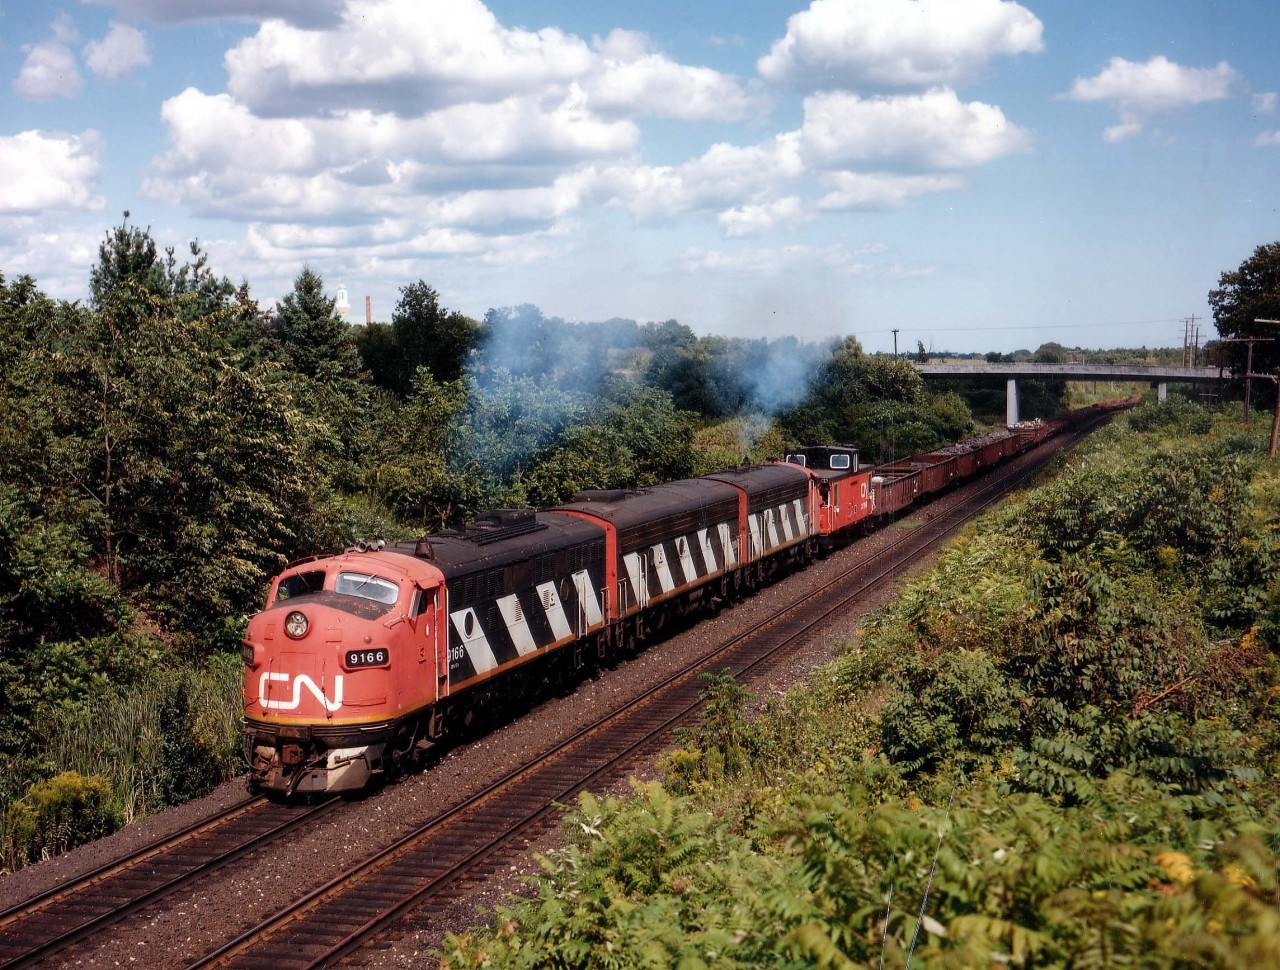 The CN version of the Nanticoke Steel Train, in this image on the move from Hamilton to the affiliated steel mill in Nanticoke by way of Brantford and south was very short lived running with this A-B-A lashup. There always seemed to be some mechanical problem and it wasn't long before GP9s were in the mix and after that, the GP40 Widecabs took over, making this, in the hearts of the fans, just another train heading west............
Seen here approaching Mile 1 Dundas sub are CN 9166, 9195 and 9177. The bridge in the background supports Old Guelph Rd.  Winning "a fight with the cloud" was nice. :o)